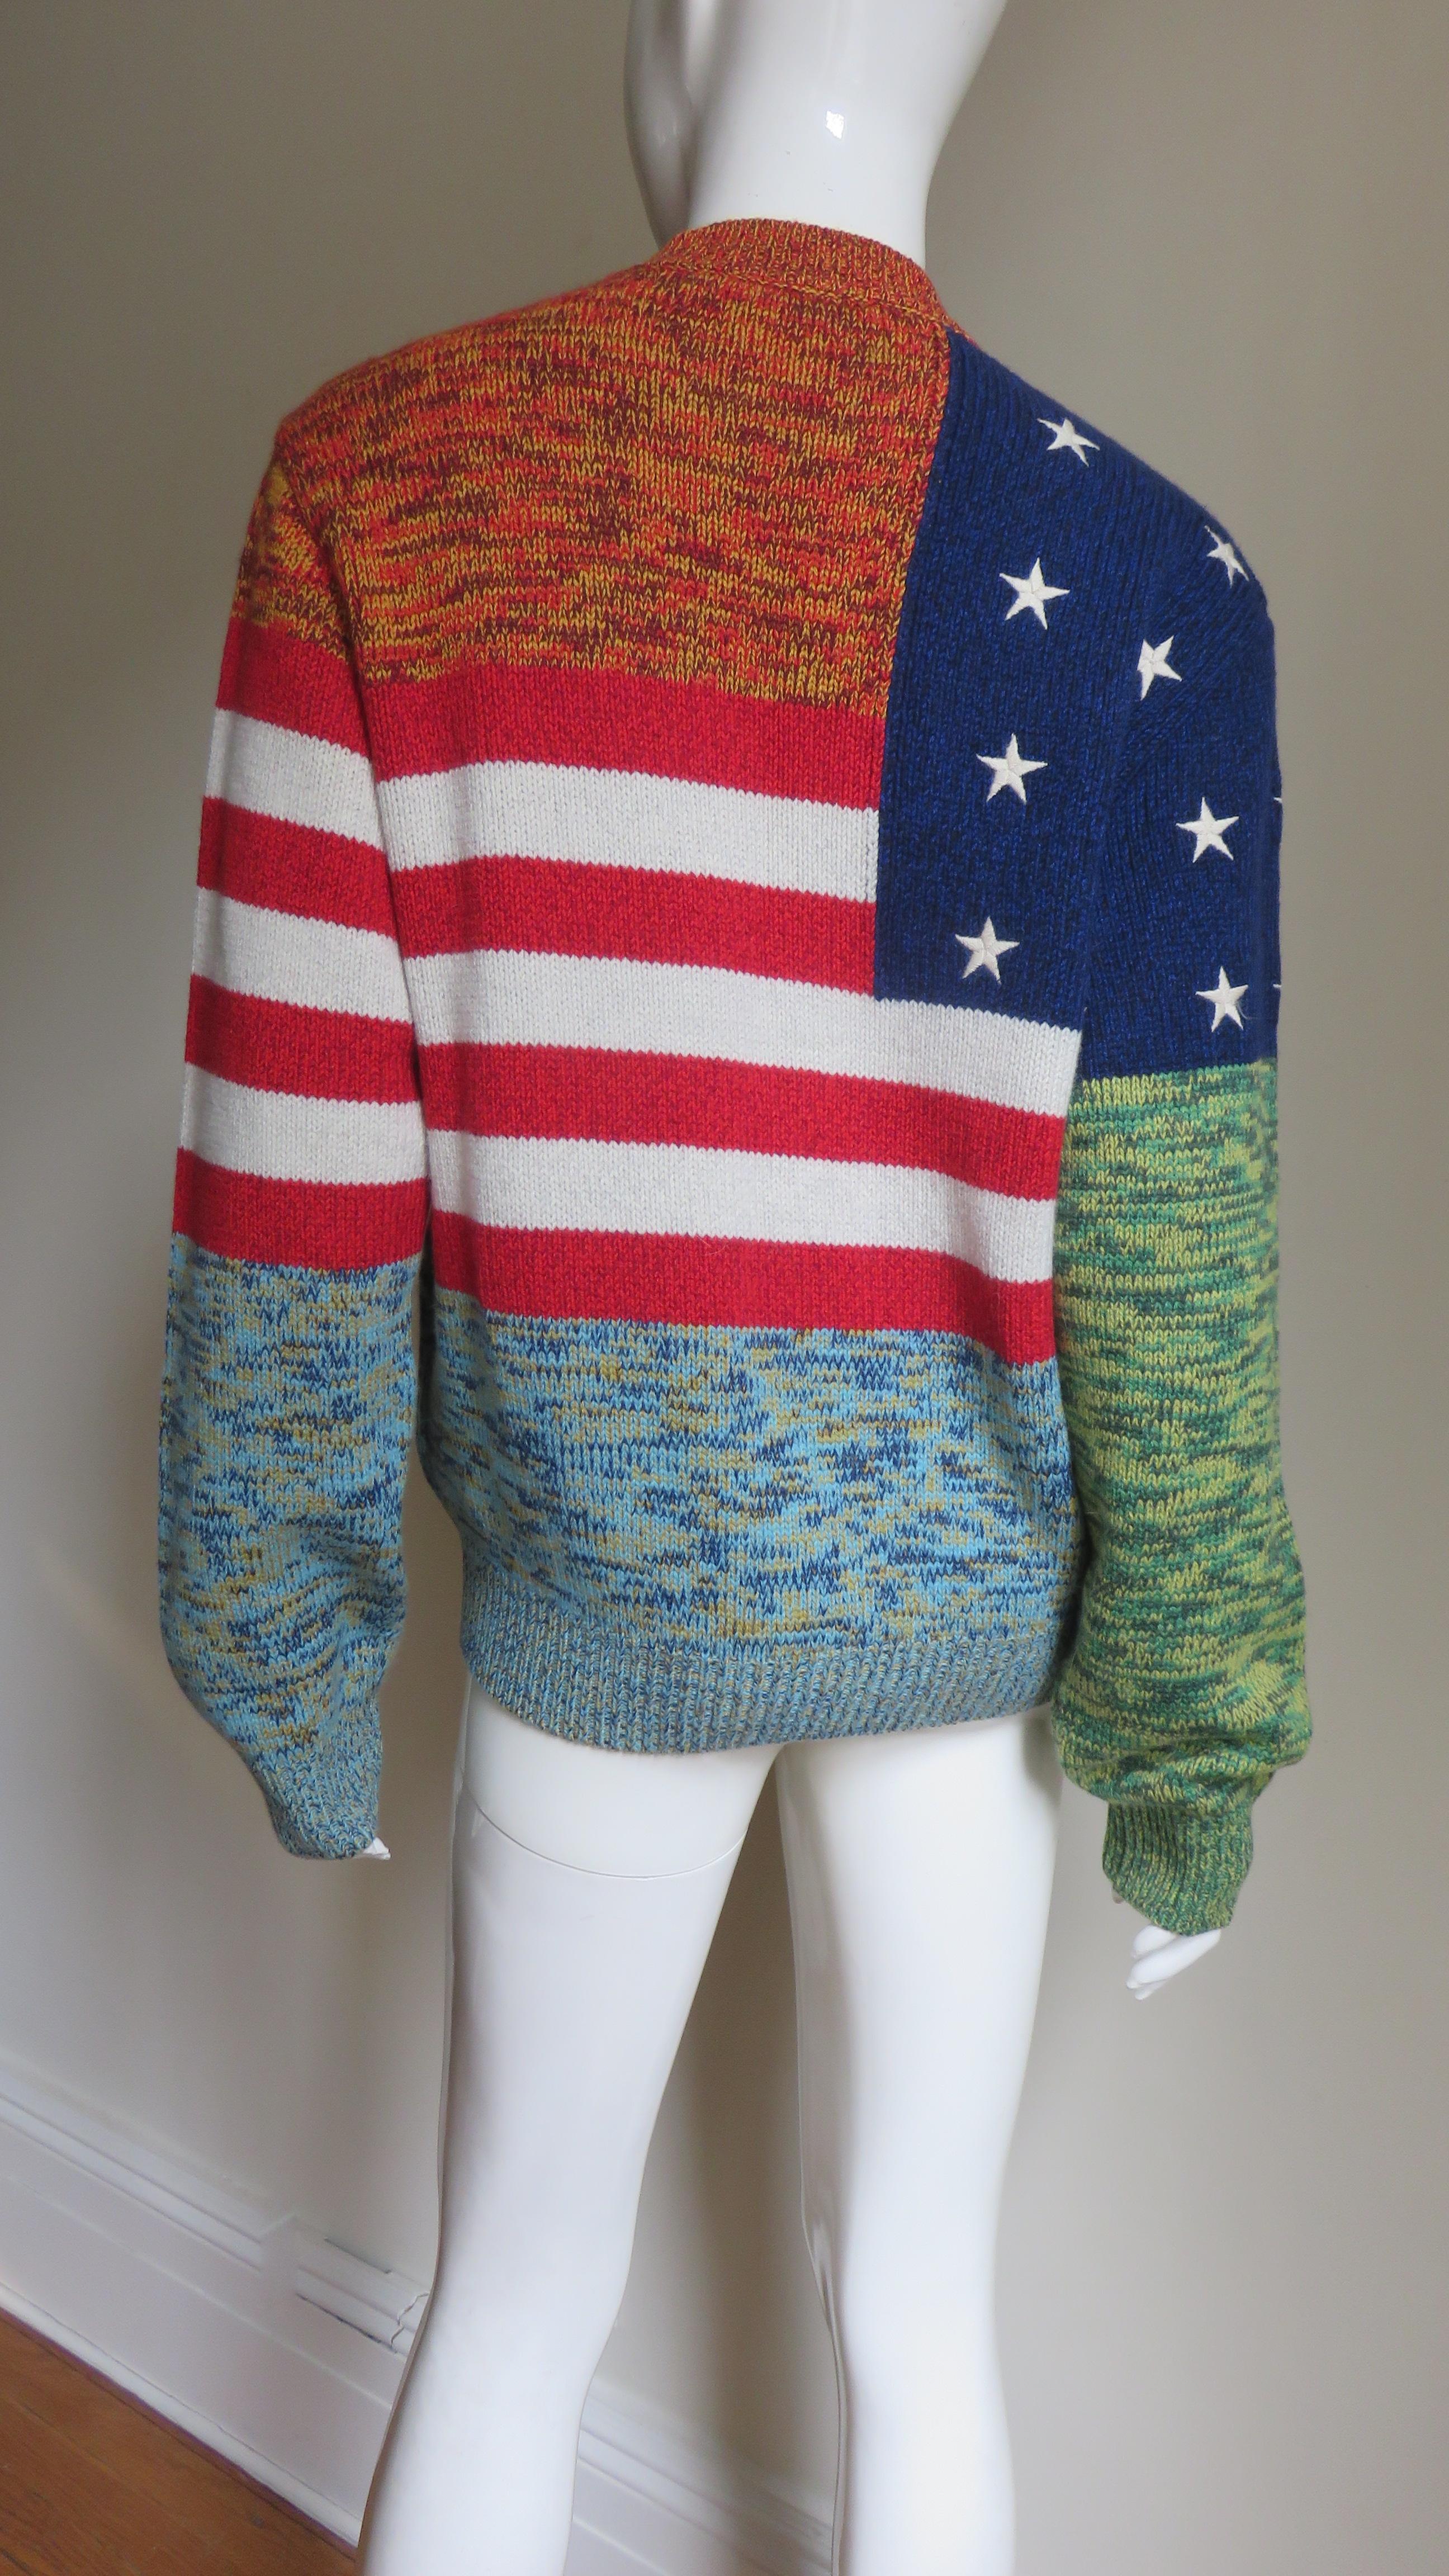 Gianni Versace New Vintage Cashmere Colorblock American Flag Sweater For Sale 2